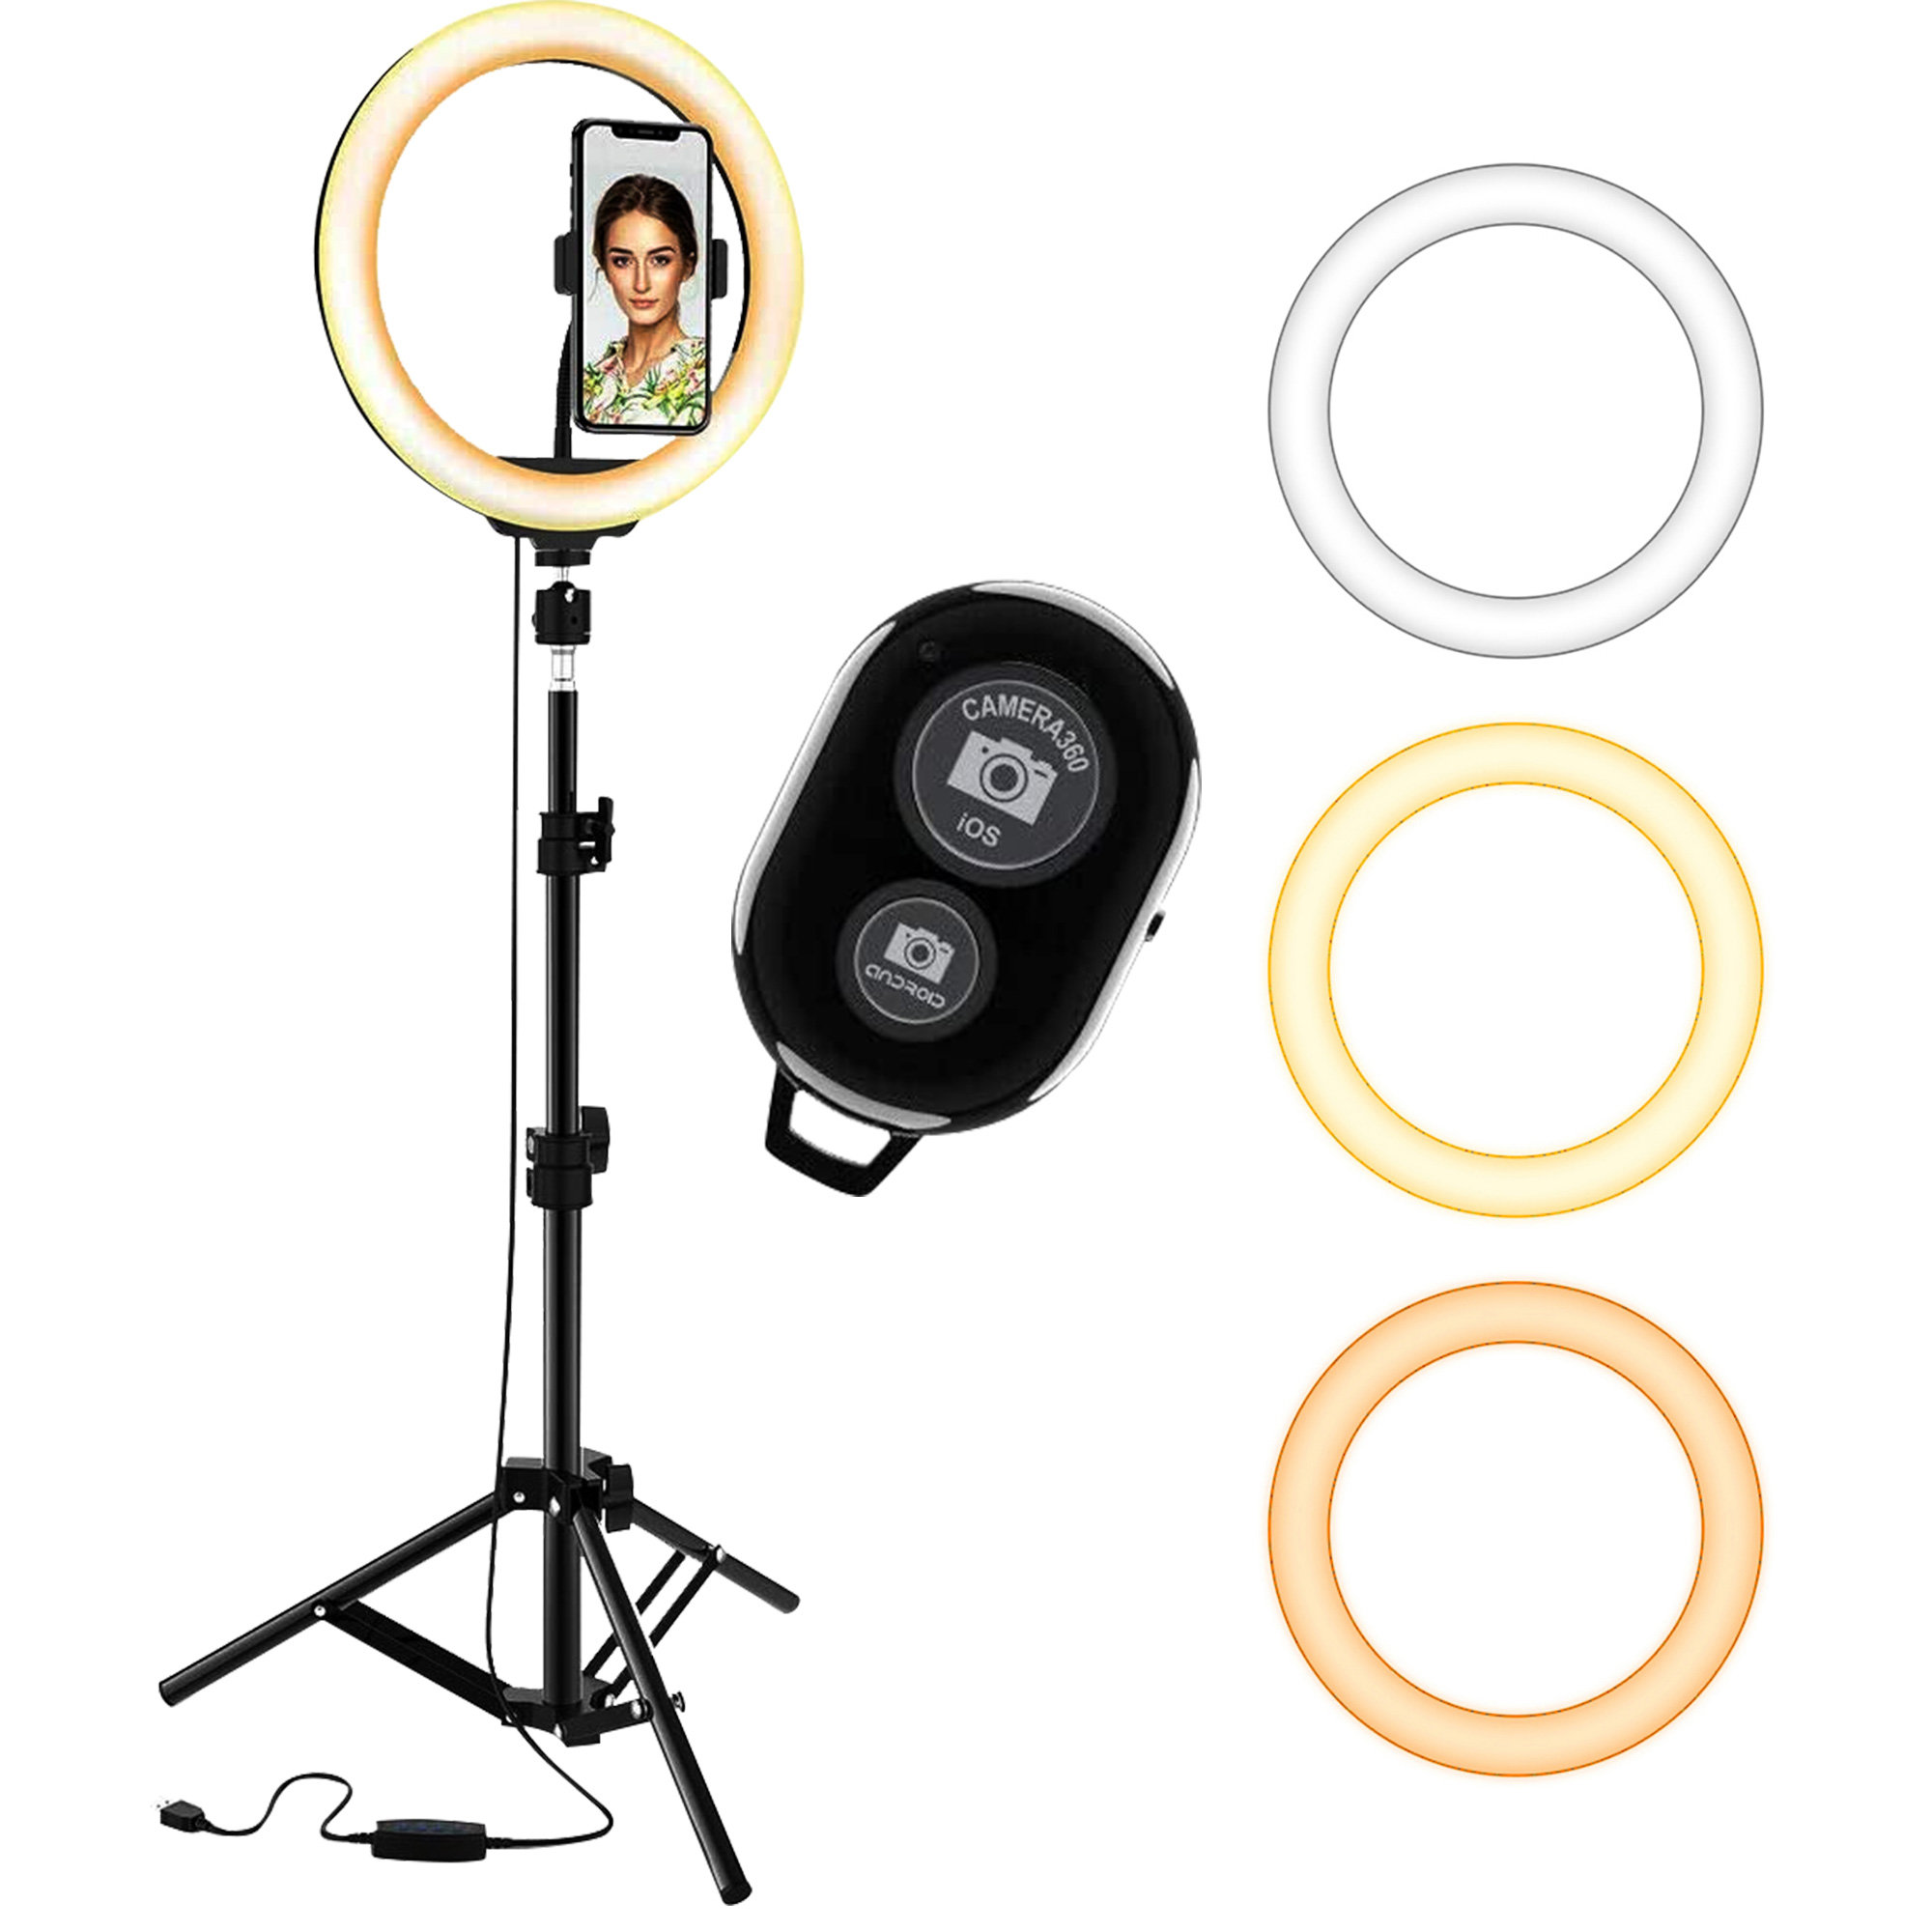 10.2 Selfie Ring Light with Phone Tripod Stand and Table Tripod and Phone  Holder, MOSFiATA Upgraded Dimmable Camera Ring Light for  TikTok/YouTube/Live Stream/Makeup/Photography price in UAE | Amazon UAE |  kanbkam